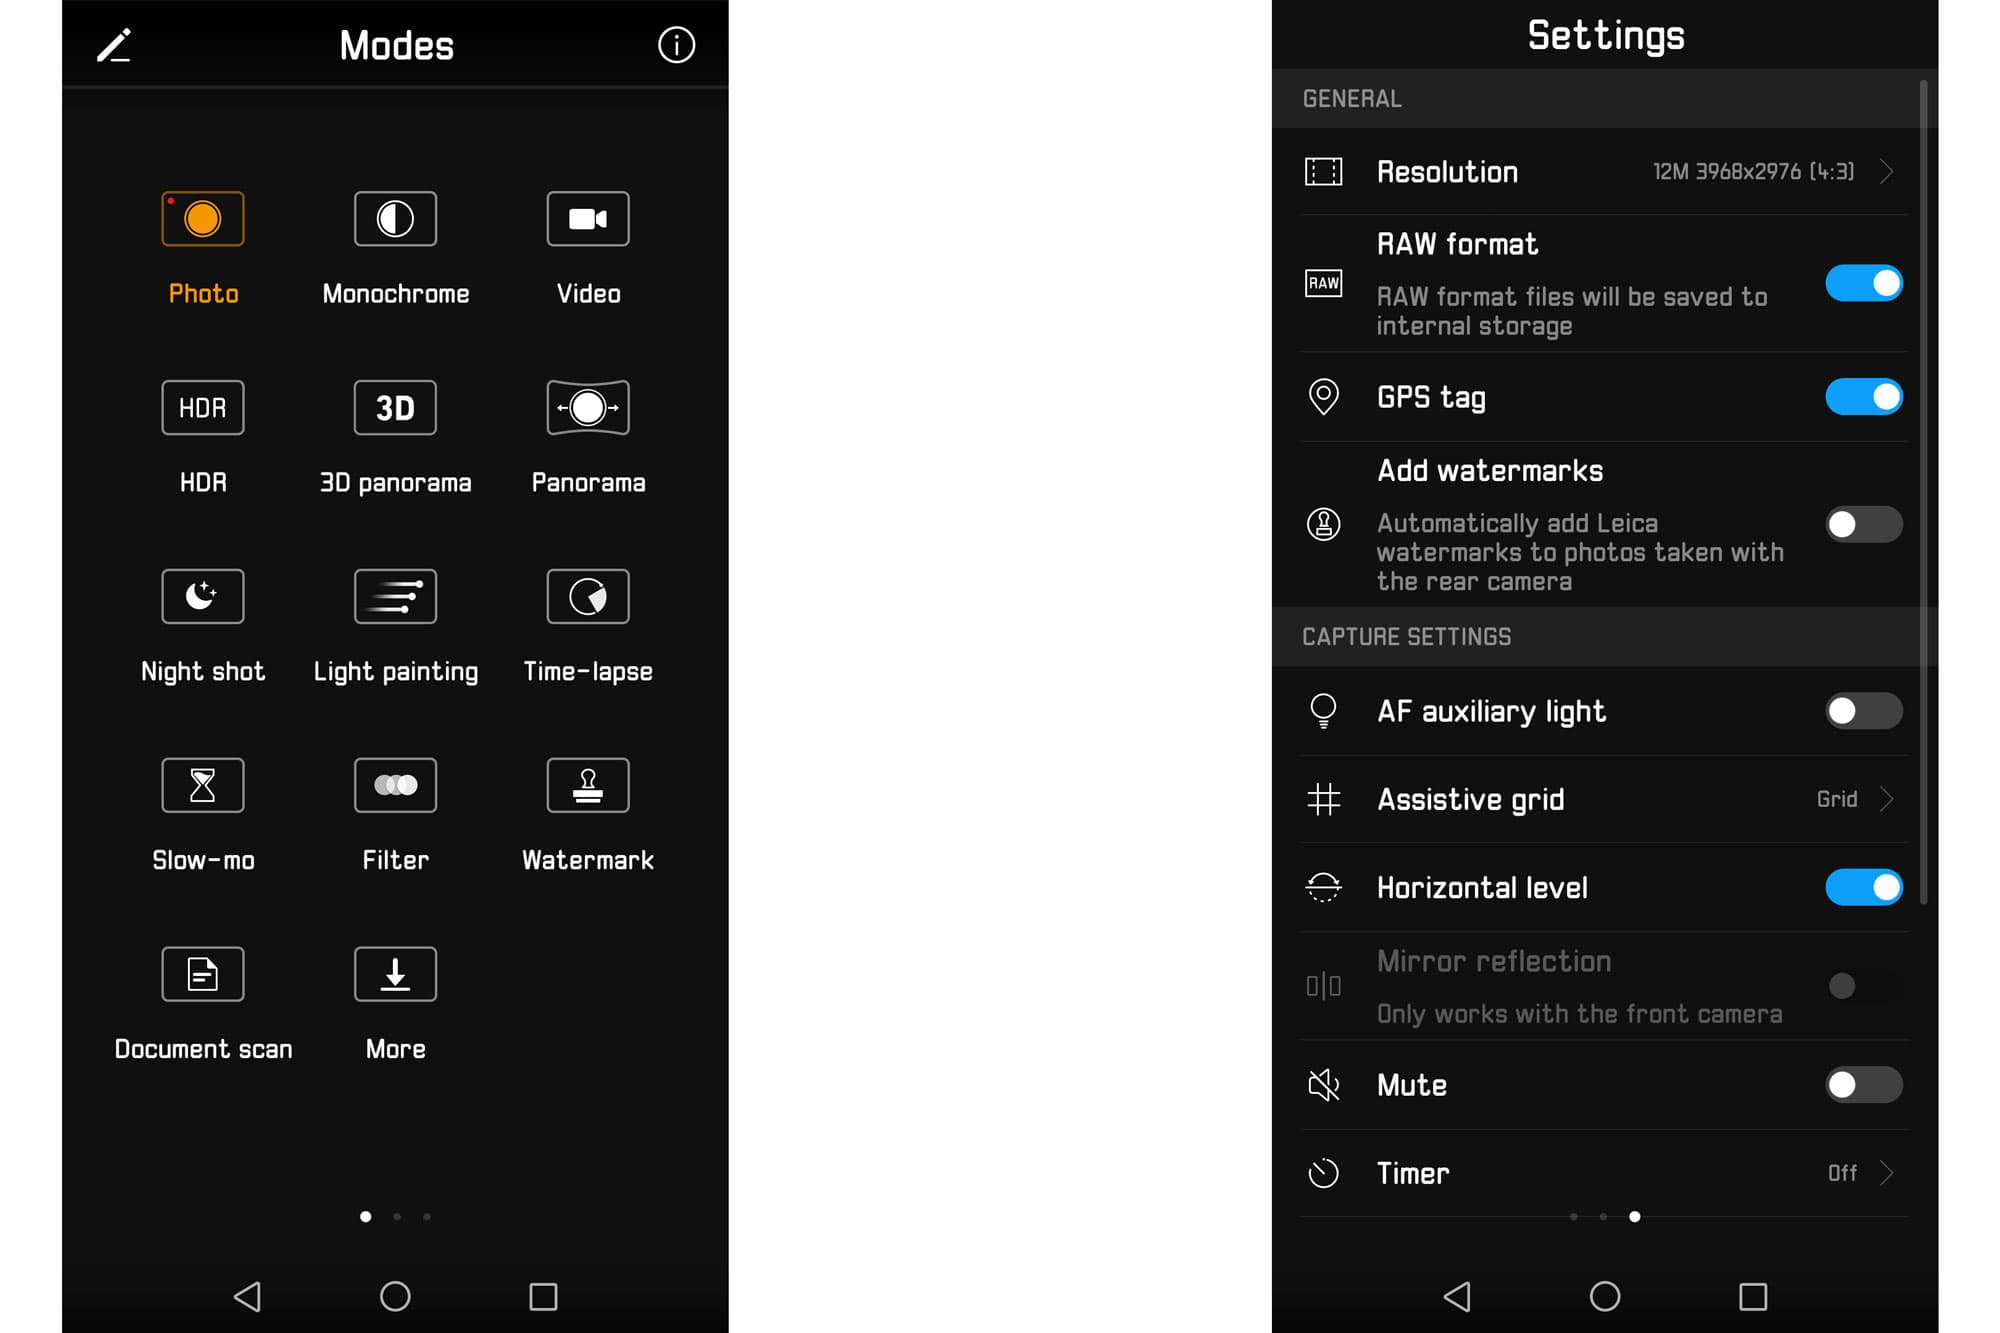 Huawei camera app modes and settings